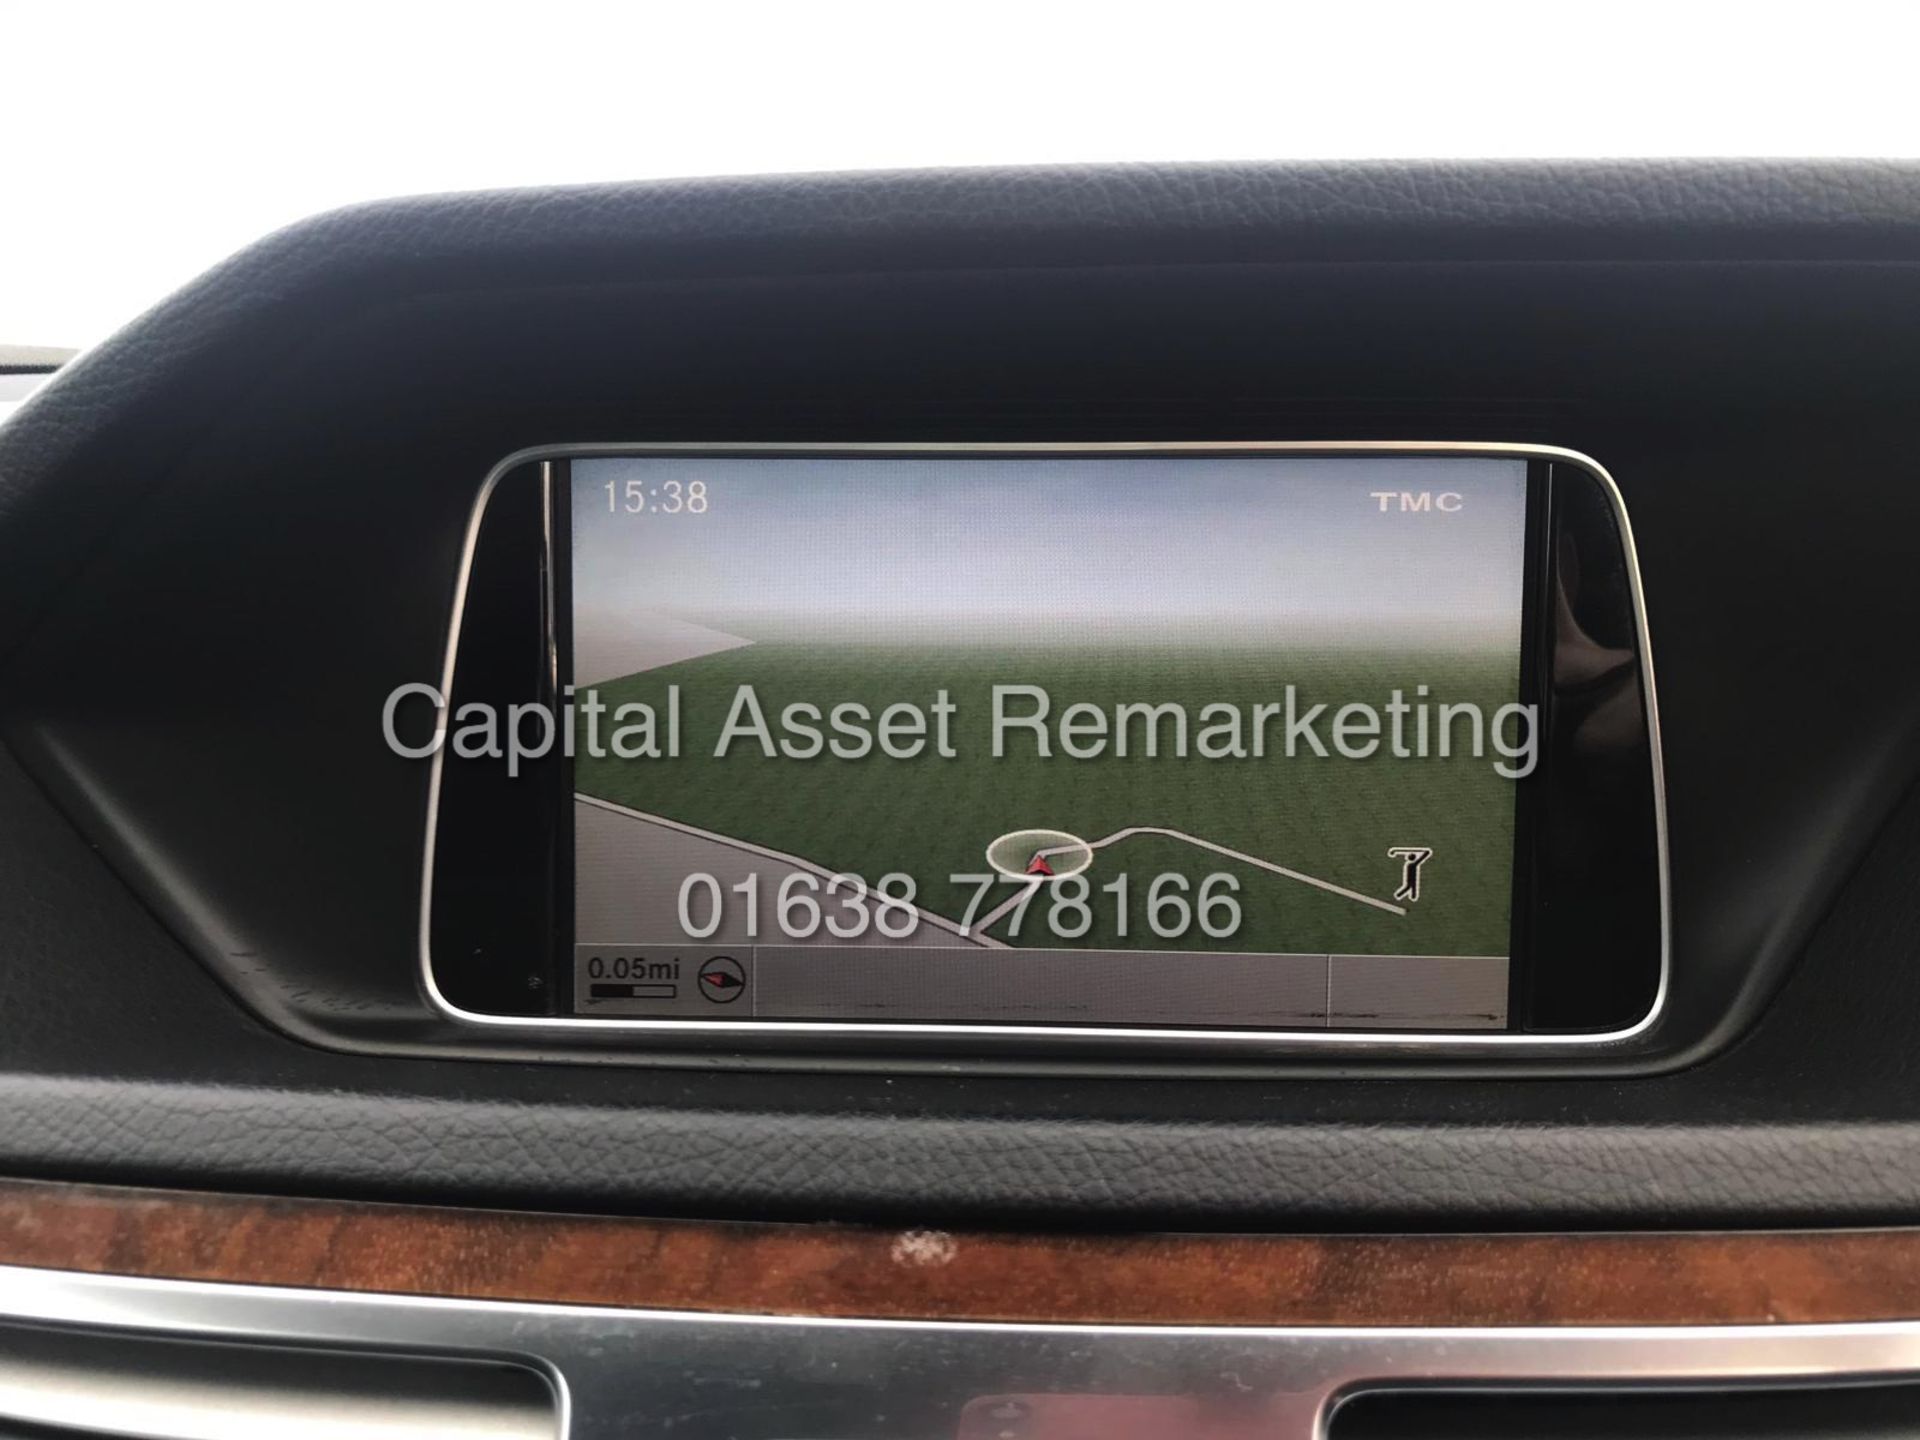 MERCEDES E220d "SPECIAL EQUIPMENT" 7G TRONIC (13 REG - NEW SHAPE) COMAND SAT NAV - LEATHER *LOOK* - Image 9 of 13